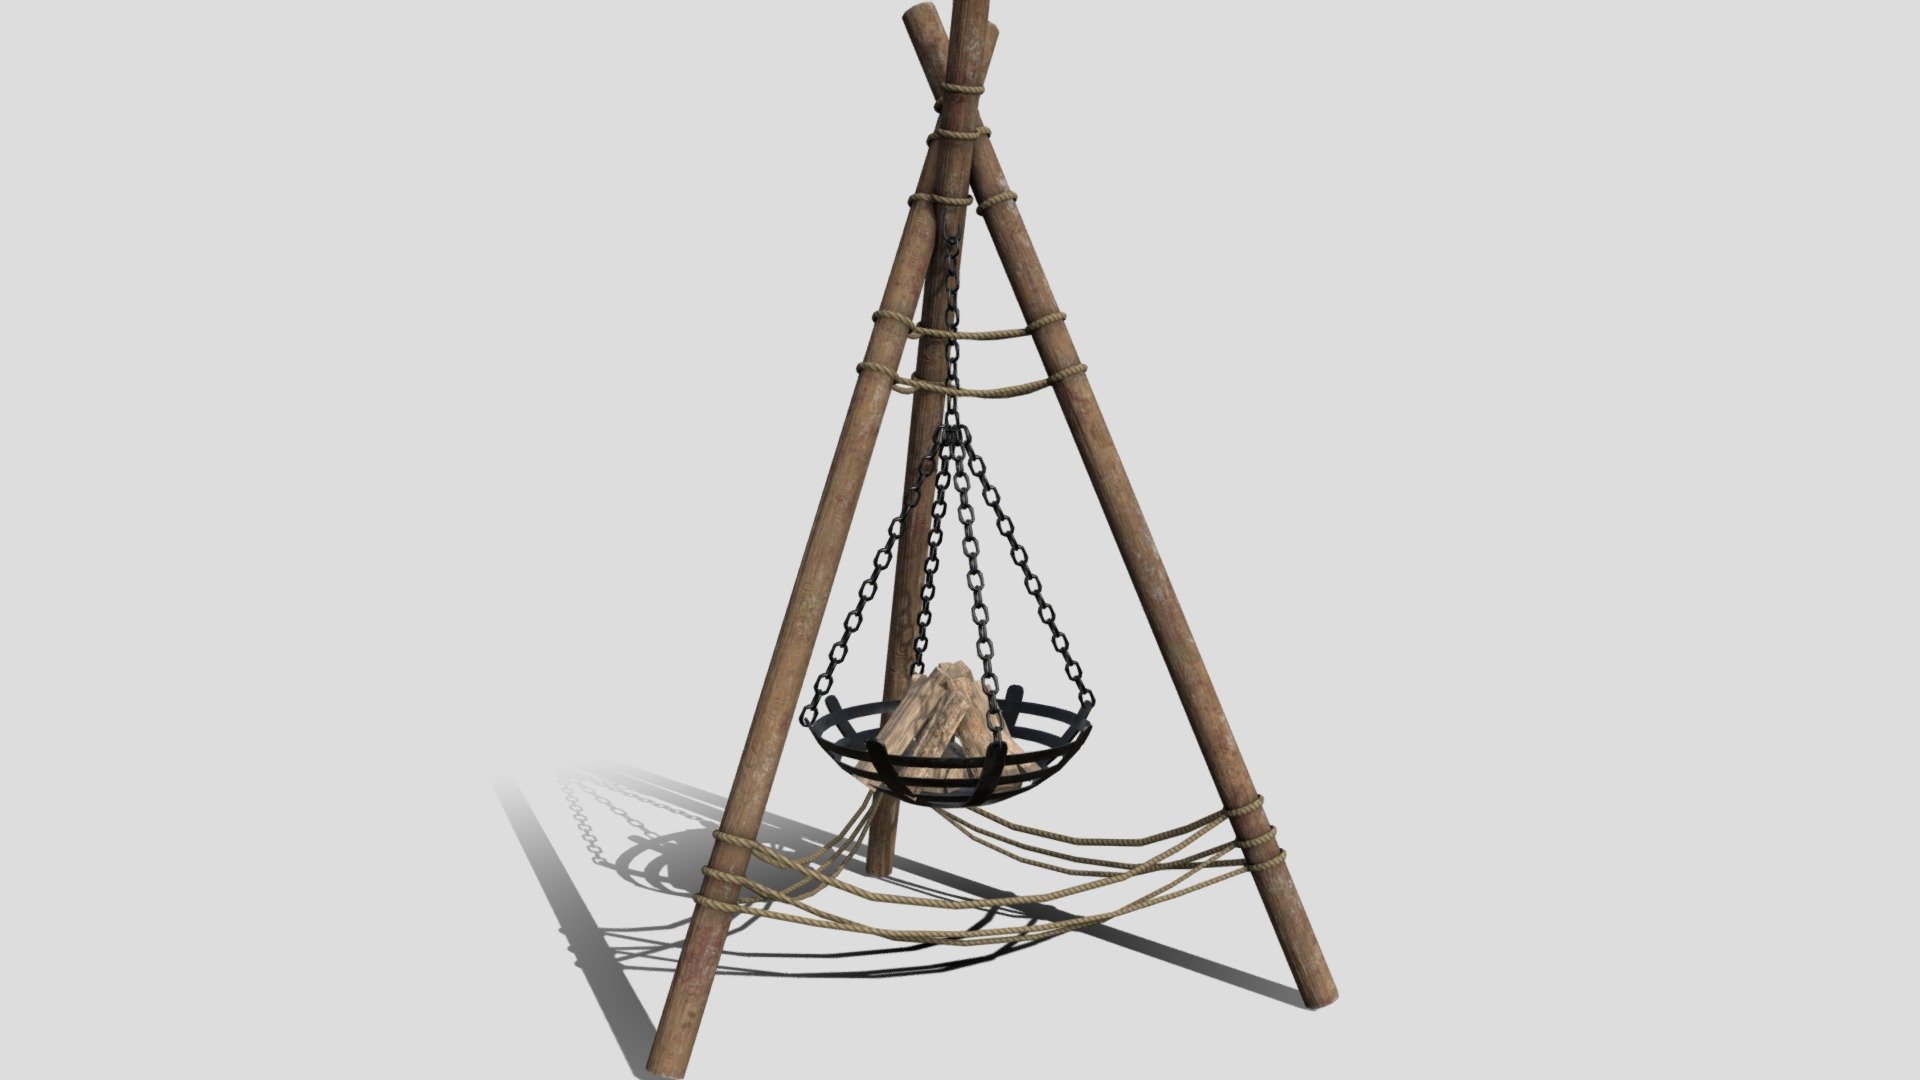 A crude standing brazier with a log fire as a seperate model. Made up of two PBR materials. Works great in any modern game engine or for rendering purposes.
Textures are in 4096x4096 resolution:




Diffuse/Base color

Metallic

Normal map

Ambient Occlusion

Roughness

Textures were created in, and exported from, Substance Painter.
Model created with, and native to, Blender.

For any help or inquiries please message me directly 3d model